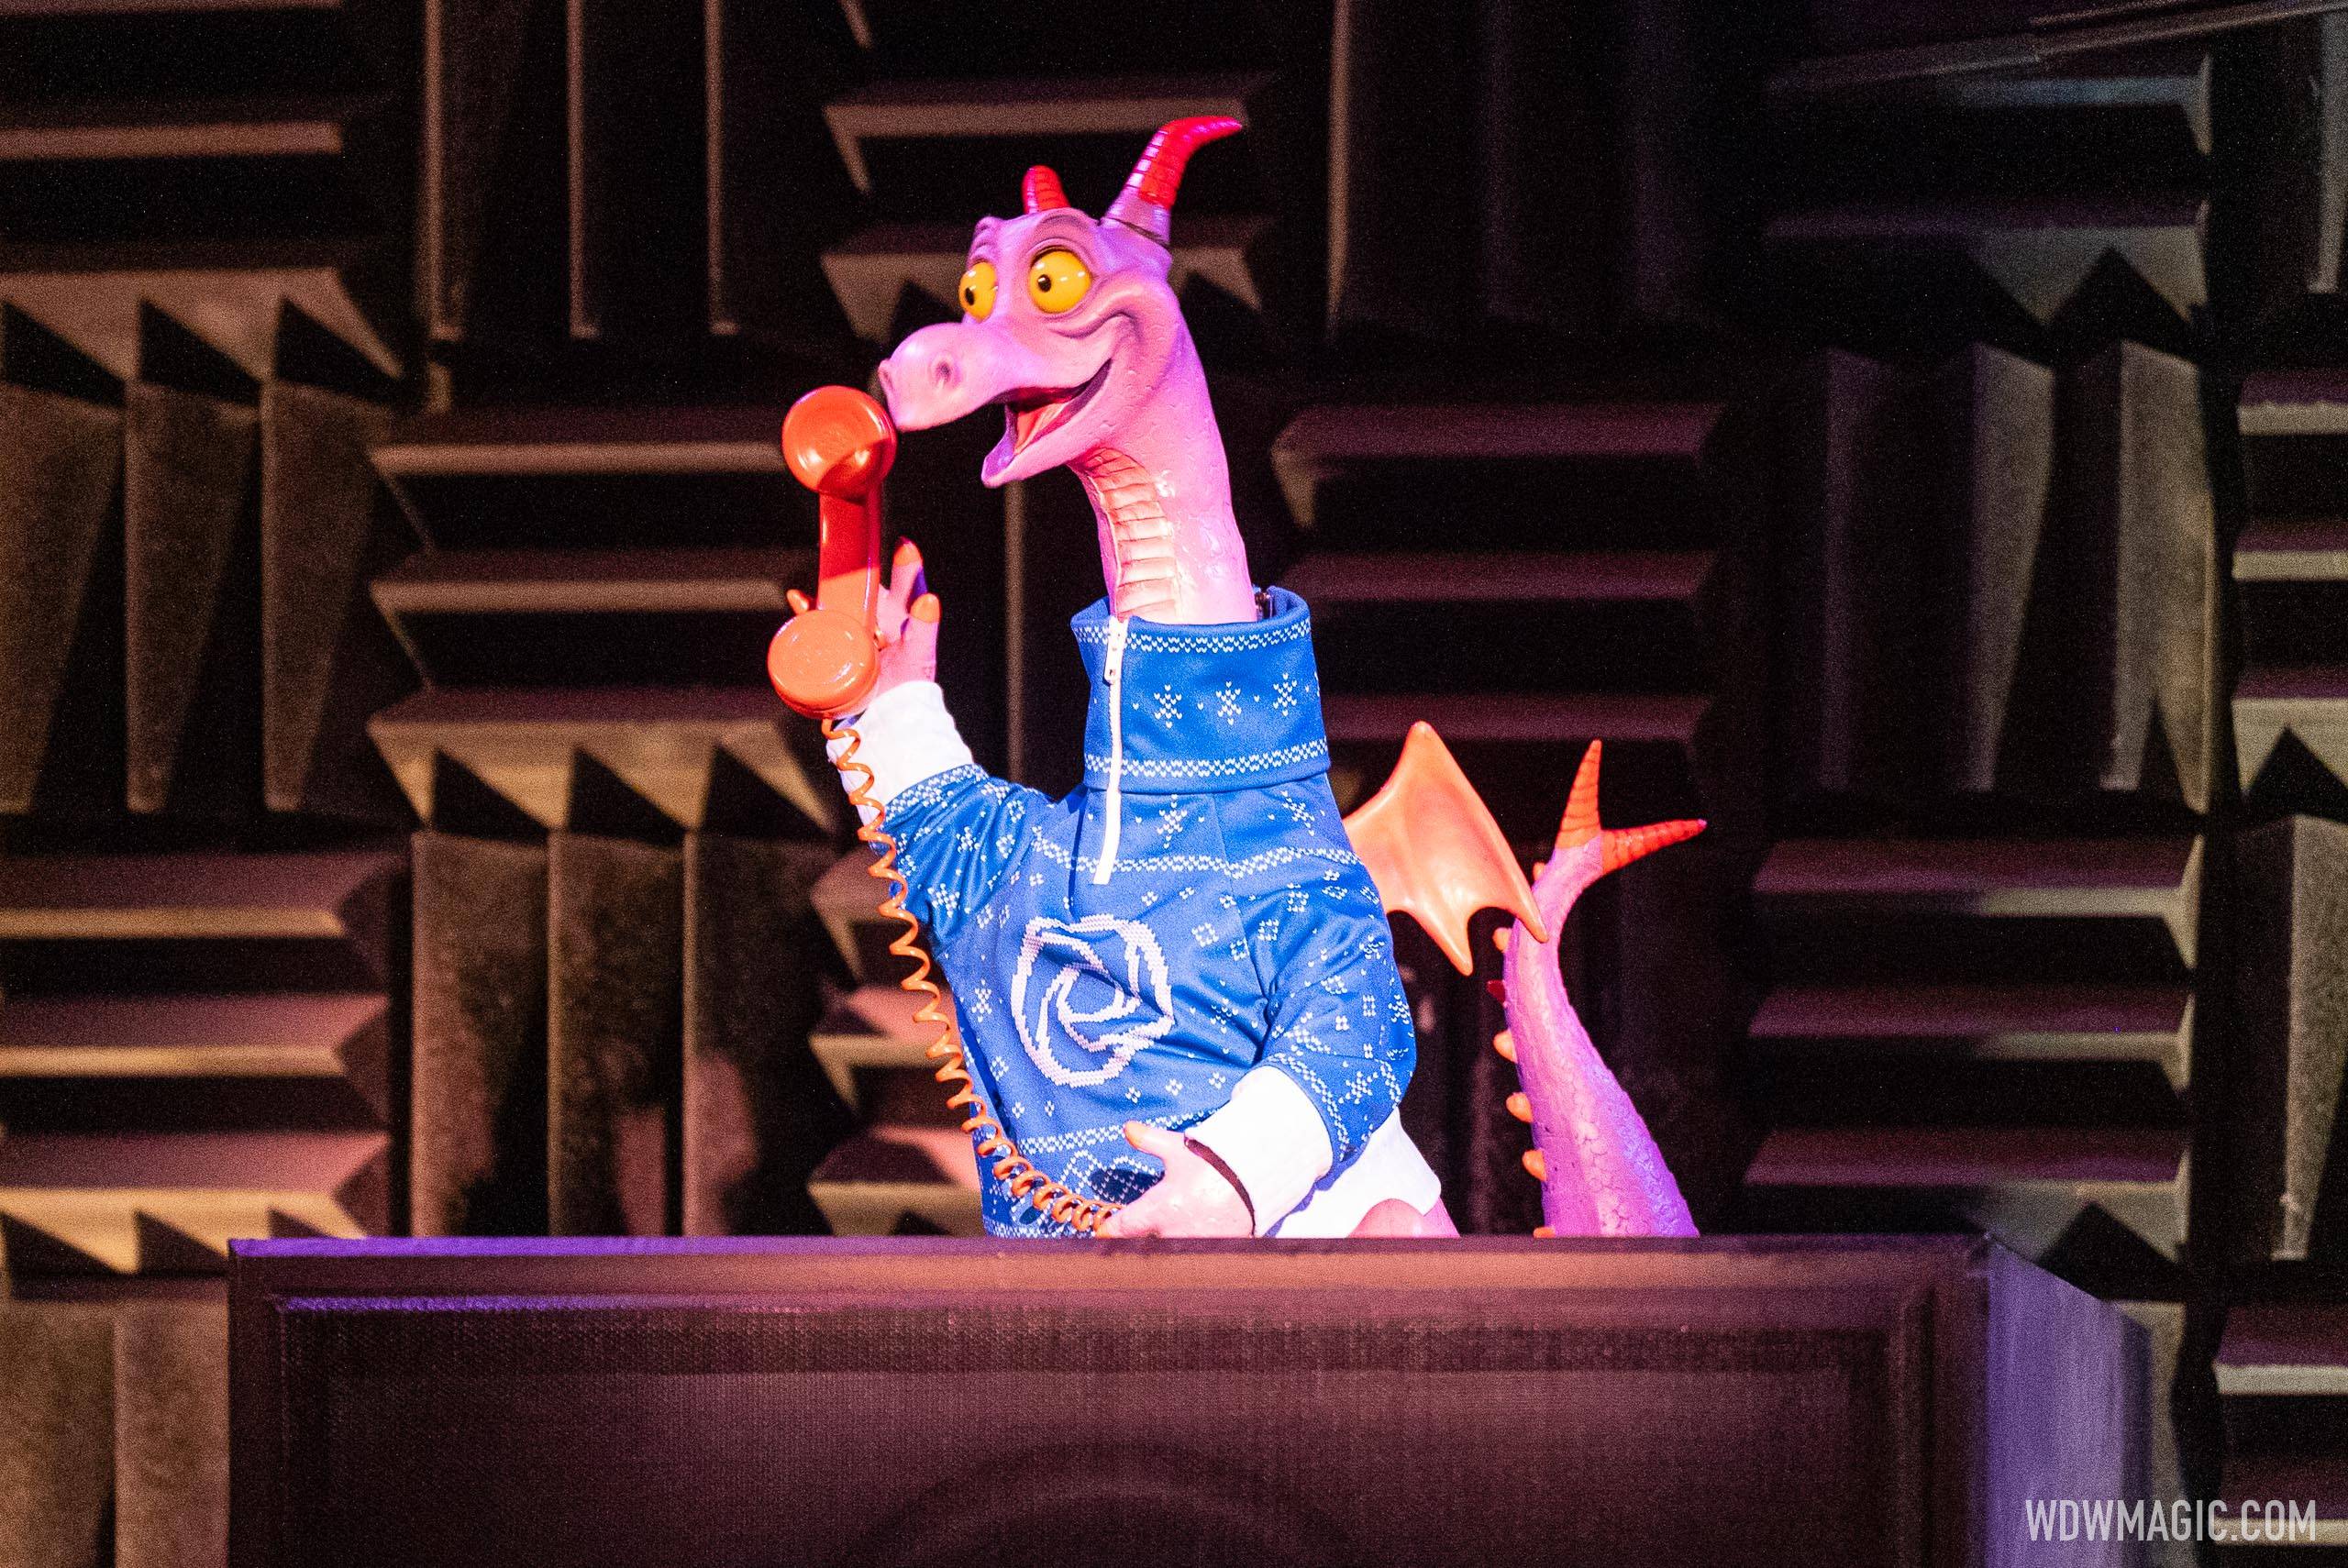 Journey into Your Imagination to be reworked into Journey into Imagination with Figment 